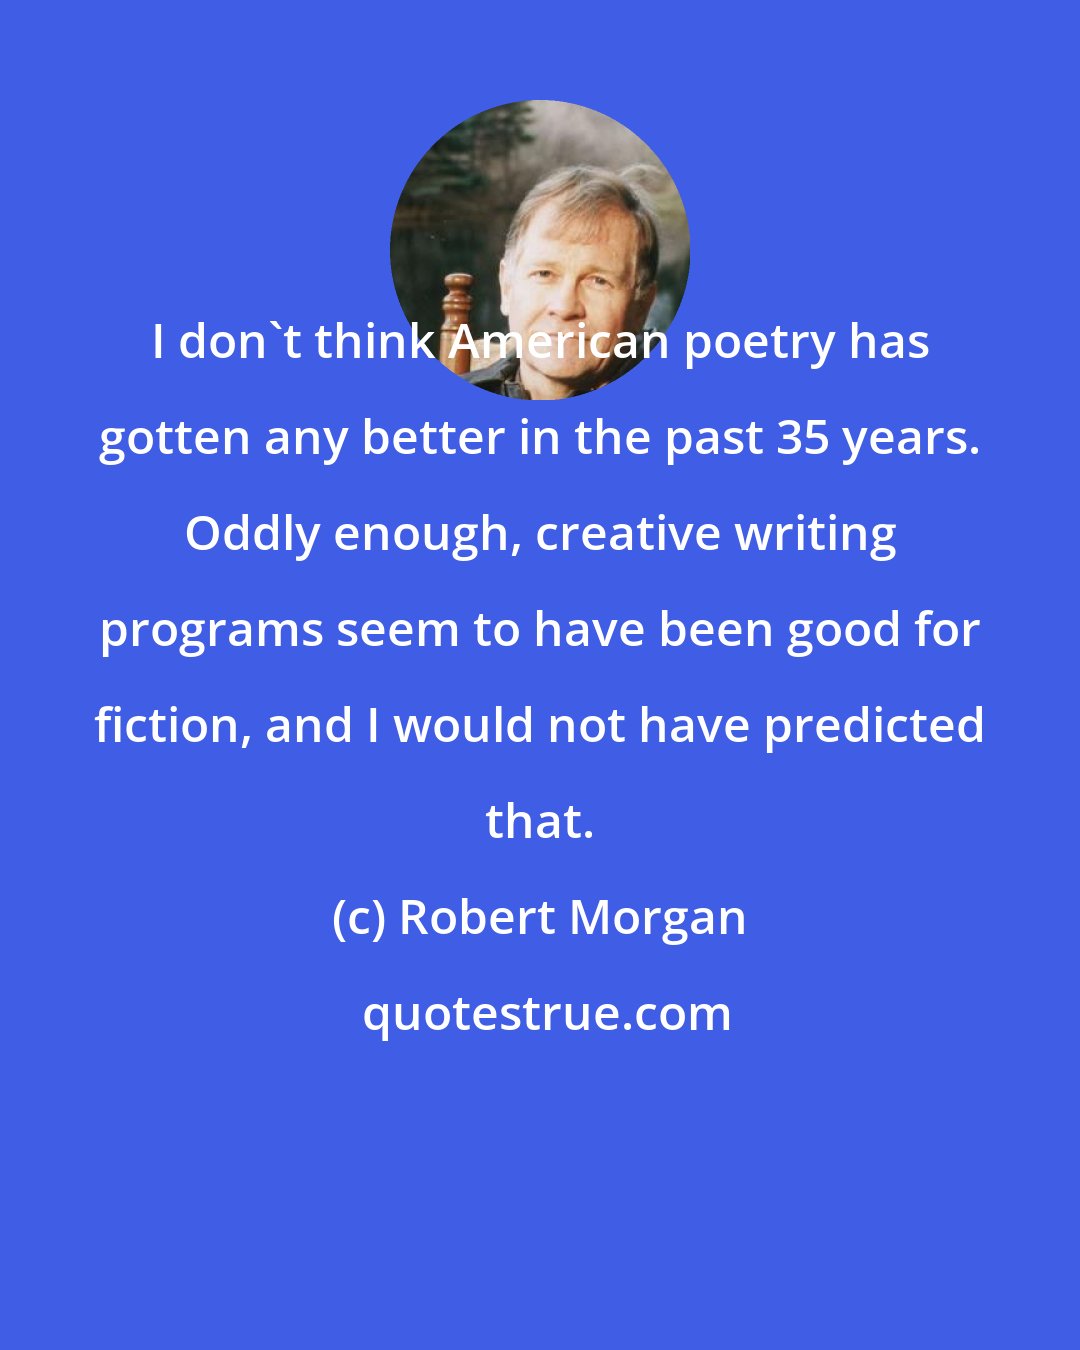 Robert Morgan: I don't think American poetry has gotten any better in the past 35 years. Oddly enough, creative writing programs seem to have been good for fiction, and I would not have predicted that.